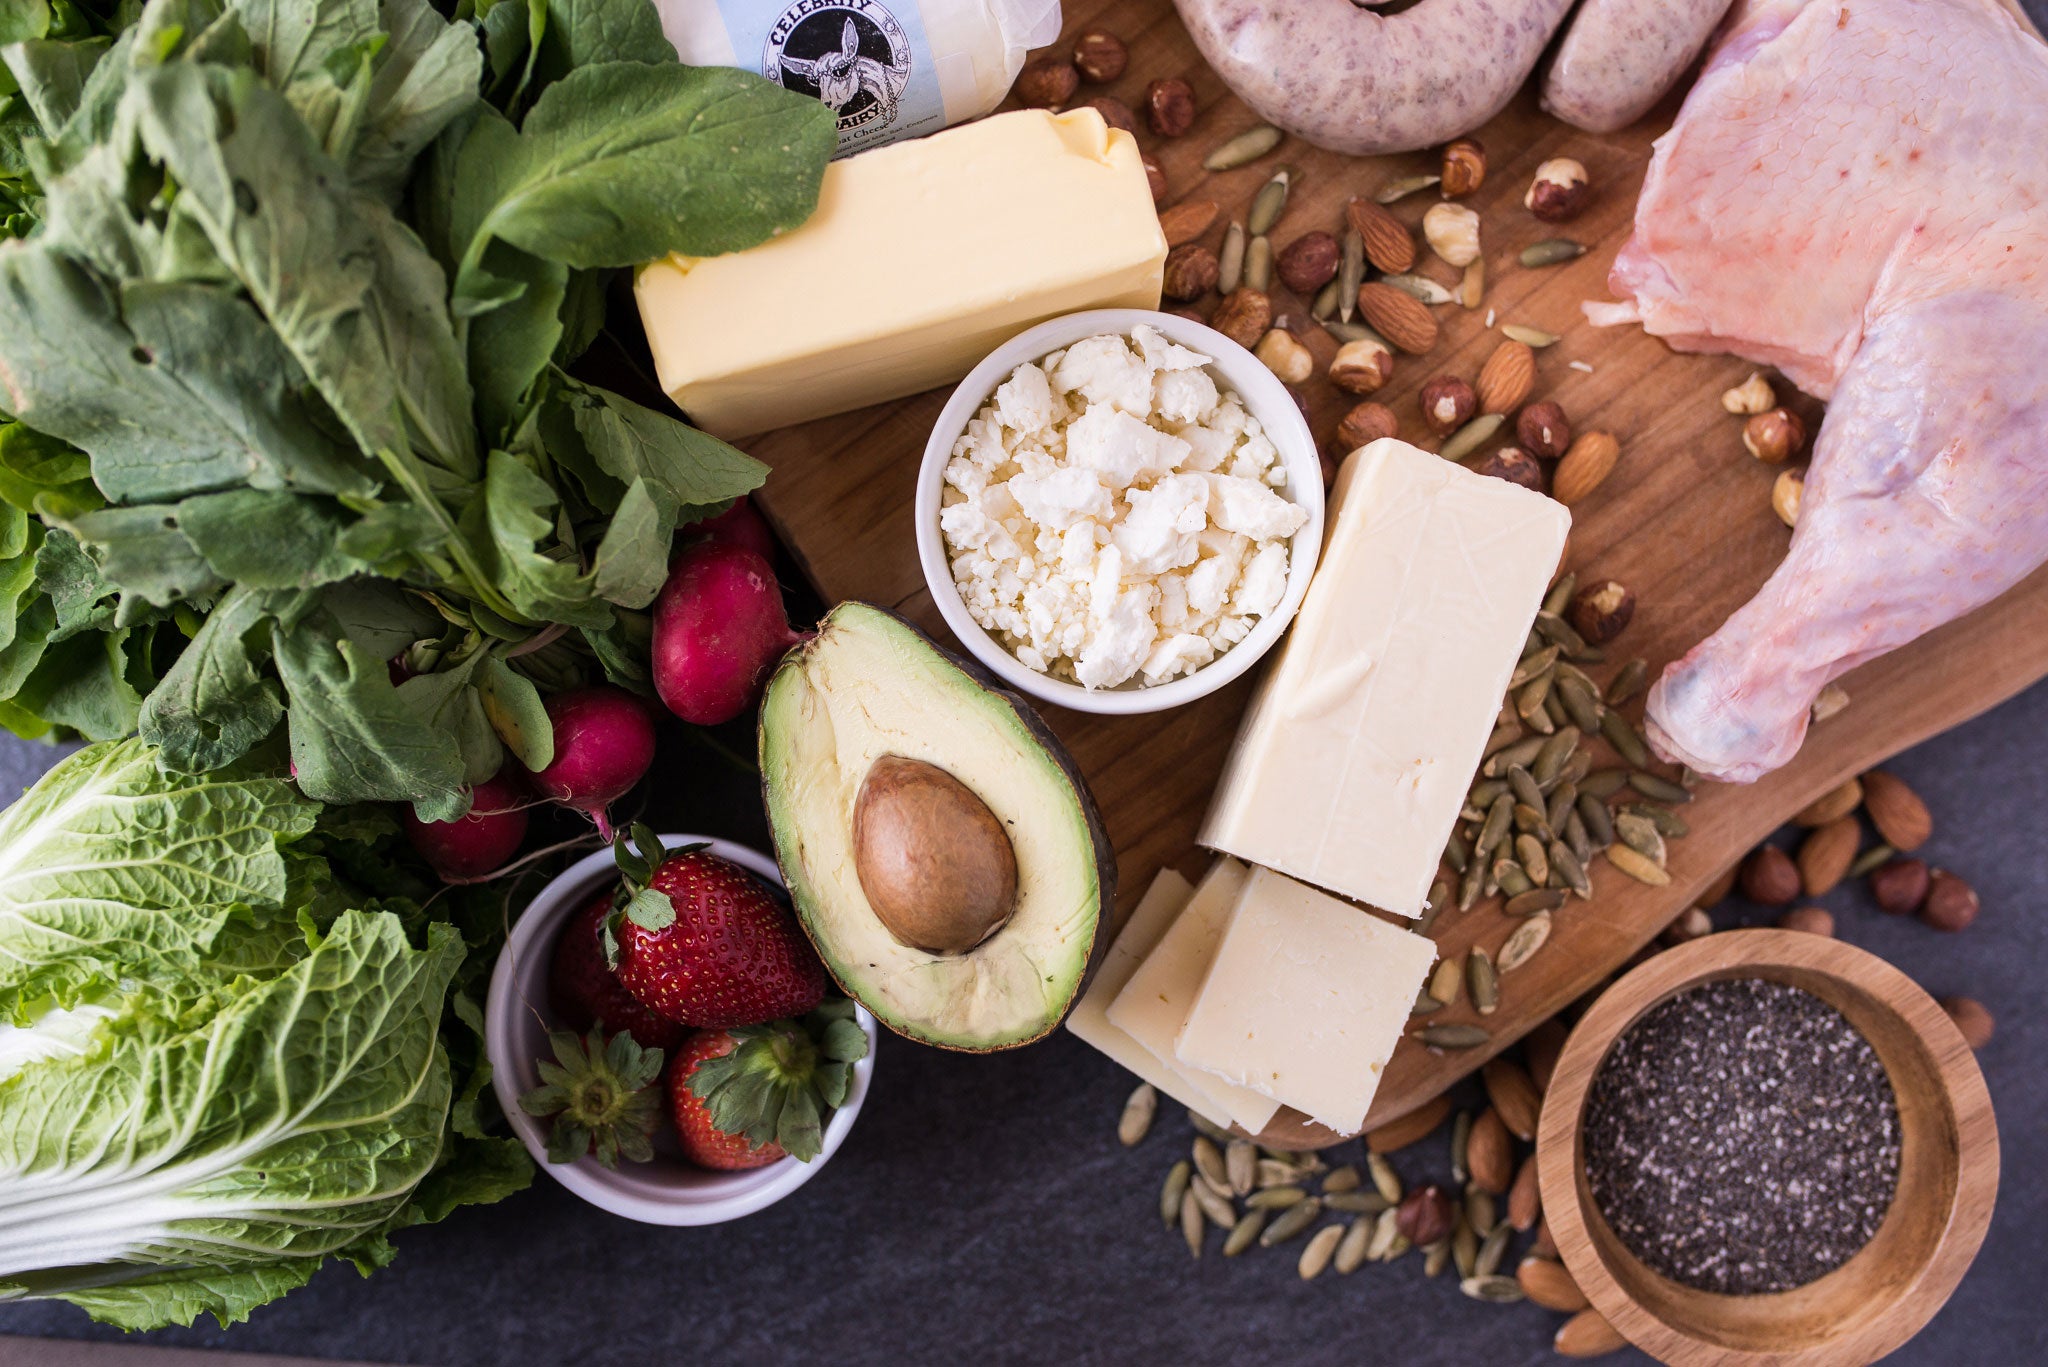 What Is the Keto Diet?